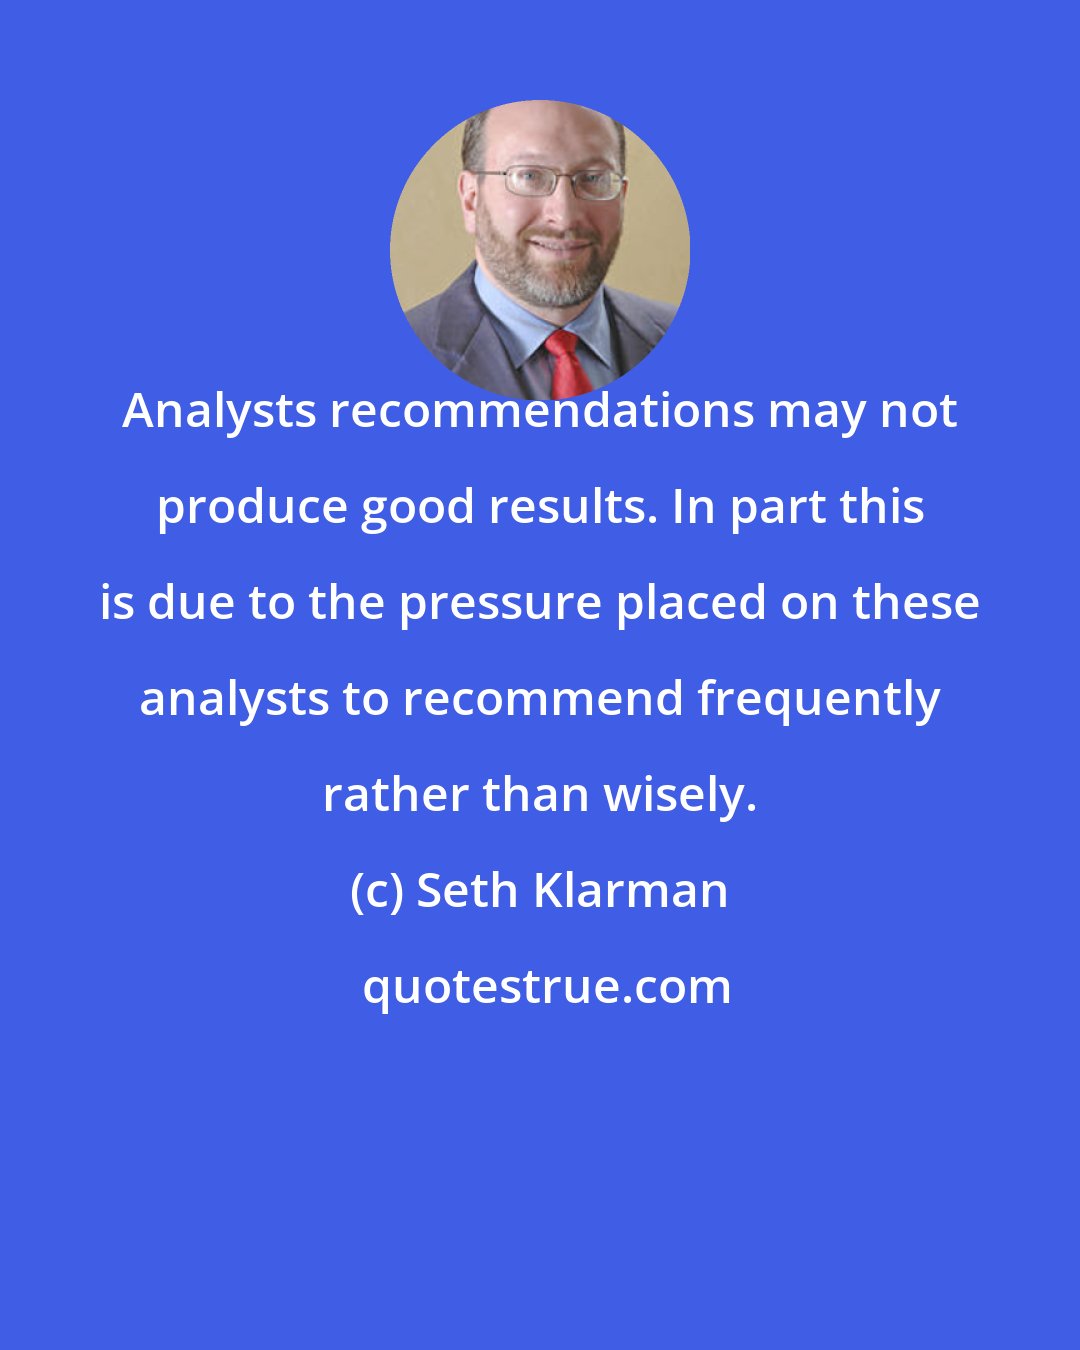 Seth Klarman: Analysts recommendations may not produce good results. In part this is due to the pressure placed on these analysts to recommend frequently rather than wisely.